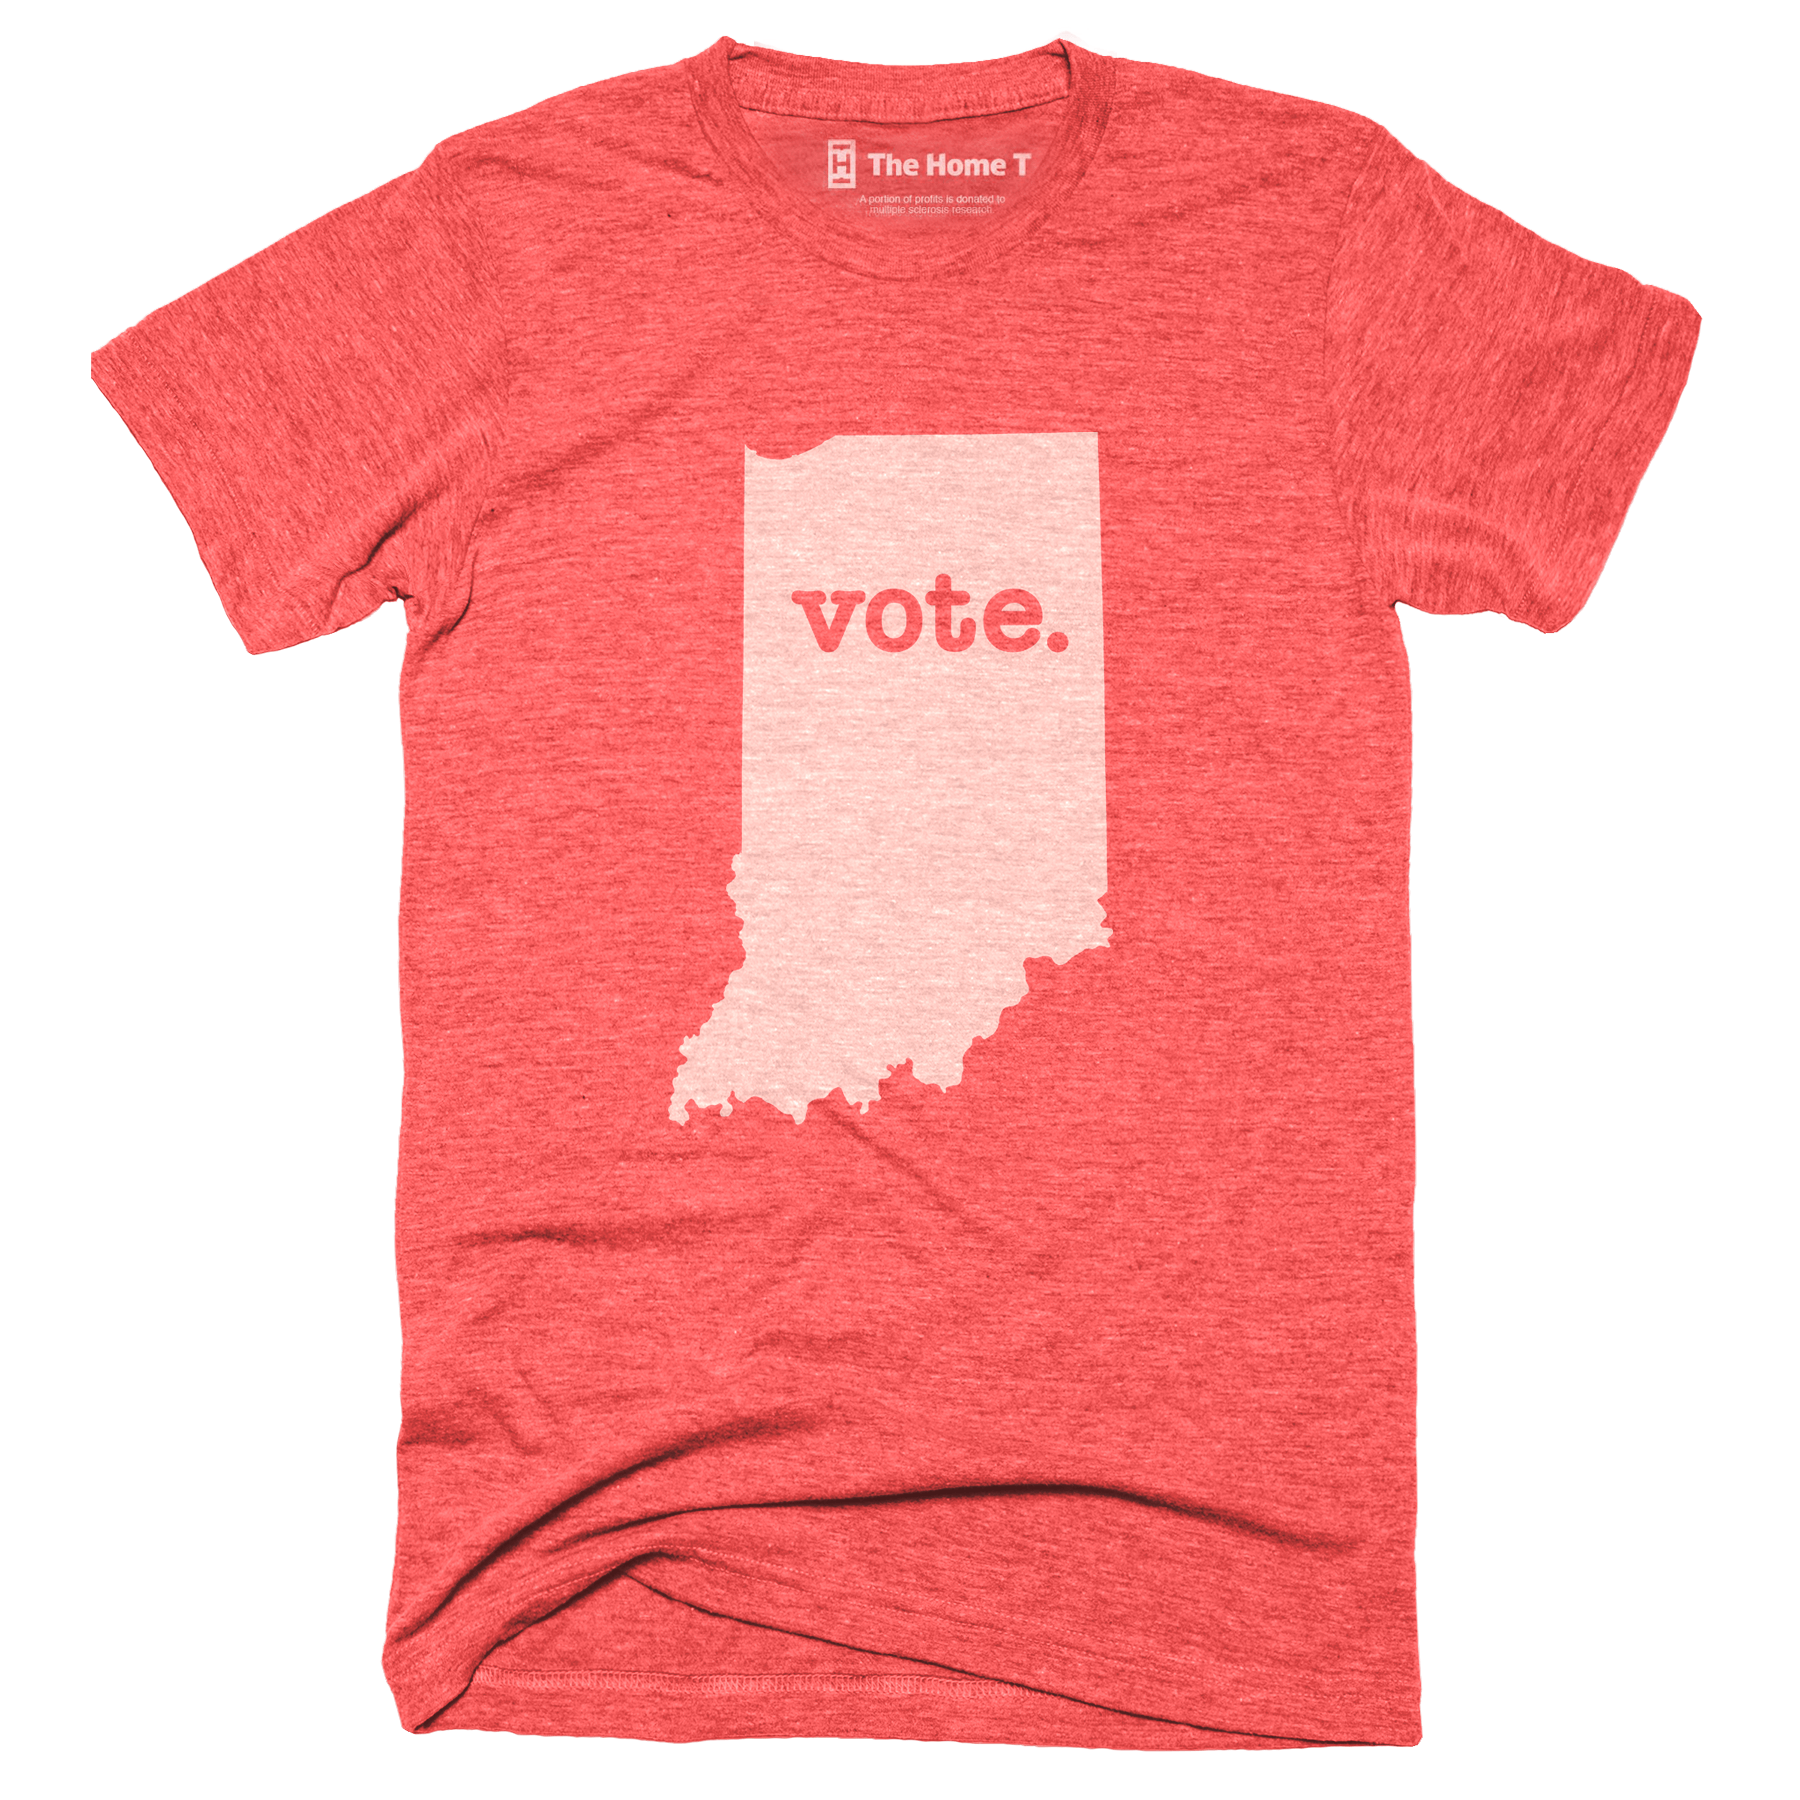 Indiana Vote Home T Vote The Home T XS Red